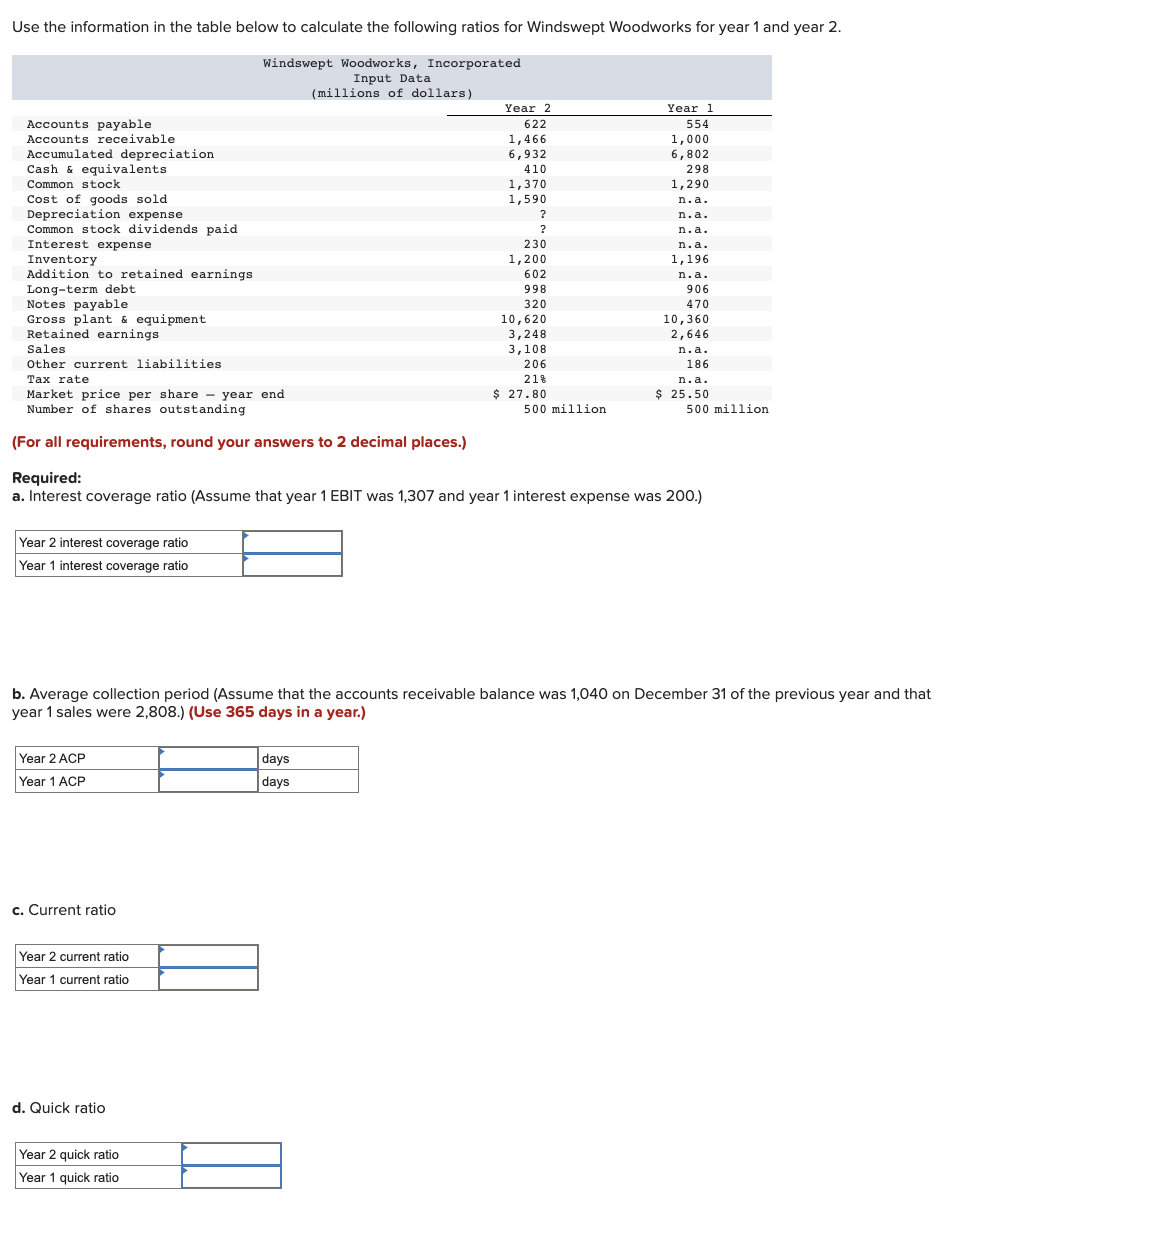 Use the information in the table below to calculate the following ratios for Windswept Woodworks for year 1 and year 2.
Windswept Woodworks, Incorporated
Input Data
(millions of dollars)
Accounts payable
Accounts receivable
Accumulated depreciation
Cash & equivalents.
Common stock
Cost of goods sold
Depreciation expense
Common stock dividends paid.
Interest expense
Inventory
Addition to retained earnings.
Long-term debt.
Notes payable
Gross plant & equipment
Retained earnings.
Sales
Other current liabilities
Tax rate
Year 2 interest coverage ratio
Year 1 interest coverage ratio
Year 2 ACP
Year 1 ACP
c. Current ratio
Year 2 current ratio
Year 1 current ratio
d. Quick ratio
Year 2
622
1,466
6,932
410
Year 2 quick ratio
Year 1 quick ratio
1,370
1,590
days
days
?
?
230
1,200
602
998
320
10,620
3,248
3,108
Market price per share-year end
Number of shares outstanding
(For all requirements, round your answers to 2 decimal places.)
Required:
a. Interest coverage ratio (Assume that year 1 EBIT was 1,307 and year 1 interest expense was 200.)
206
21%
$ 27.80
Year 1
554
1,000
6,802
298
500 million
1,290
n.a.
n.a.
n.a.
b. Average collection period (Assume that the accounts receivable balance was 1,040 on December 31 of the previous year and that
year 1 sales were 2,808.) (Use 365 days in a year.)
n.a.
1,196
n.a.
906
470
10,360
2,646
n.a.
186
n.a.
$25.50
500 million